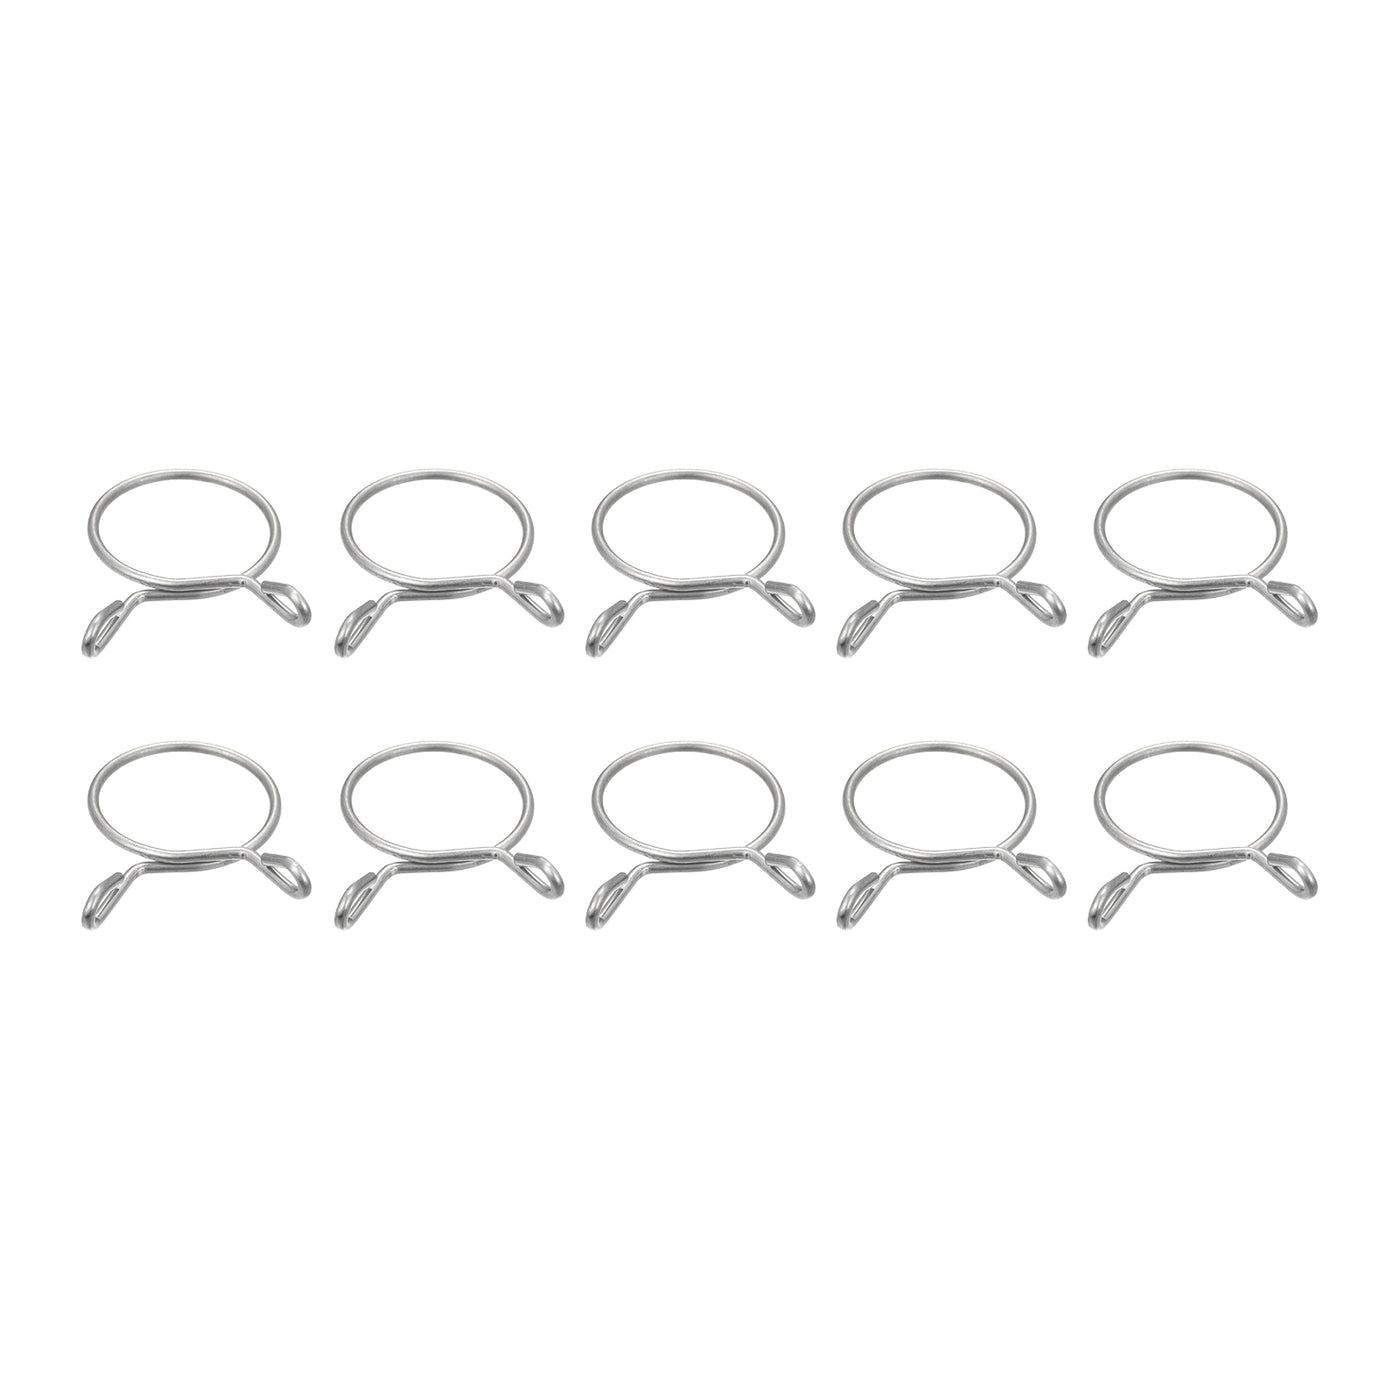 Uxcell Uxcell Fuel Line Hose Clips, 10pcs 29mm 304 Stainless Steel Tube Spring Clamps(Silver)